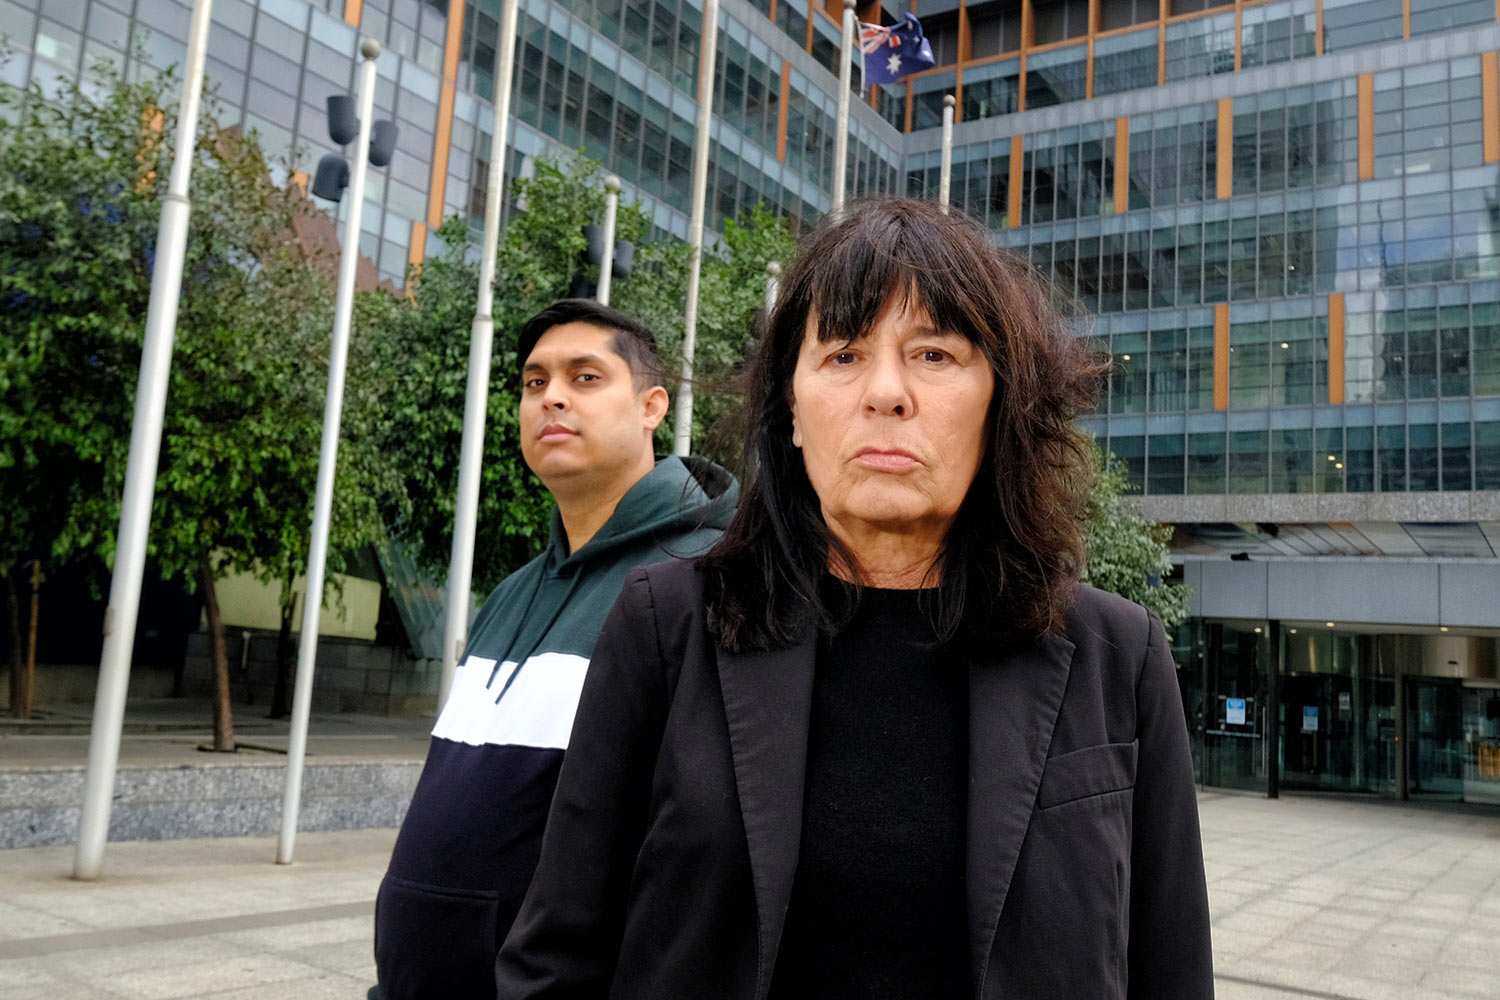 Uber drivers Syed Mubashir and Debra Weddall outside the Federal Court in Melbourne. Credit: Luis Enrique Ascui